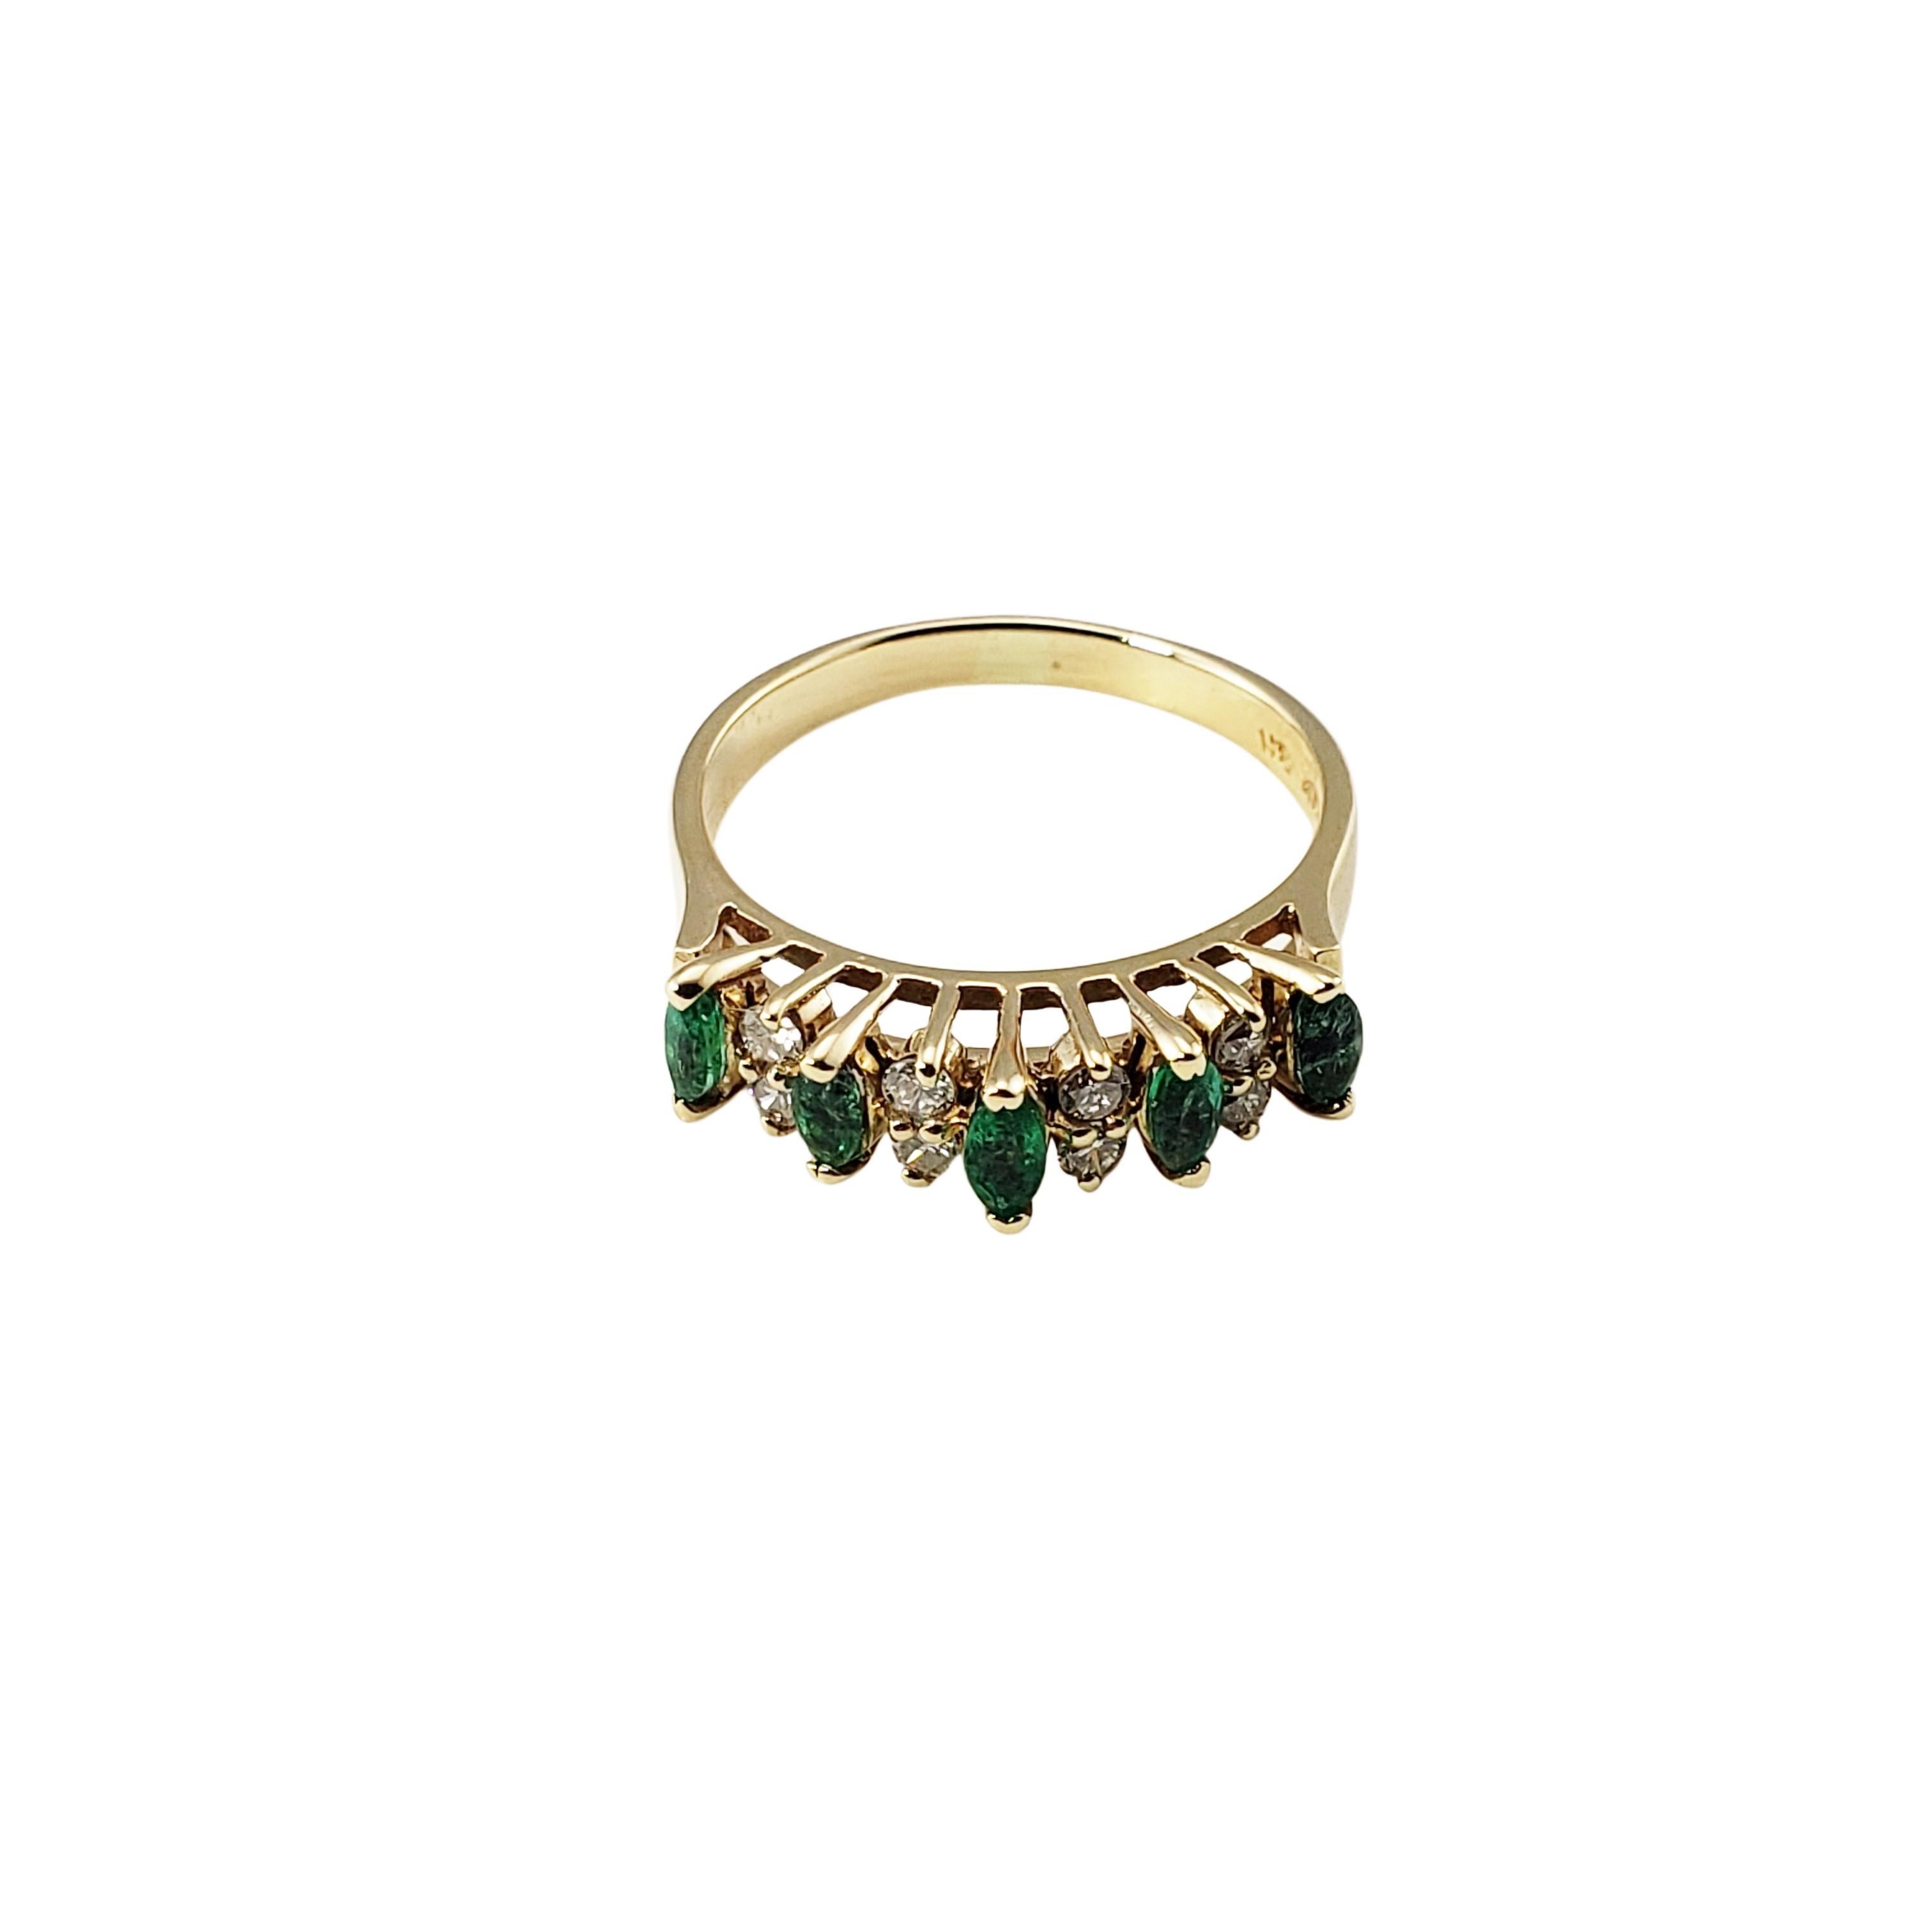 Vintage 14 Karat Yellow Gold Emerald and Diamond Ring Size 6.75-

This lovely ring features five marquis emeralds and eight round brilliant cut diamonds set in classic 14K yellow gold.  Width: 5 mm.
Shank: 2.5 mm.

Approximate total diamond weight: 